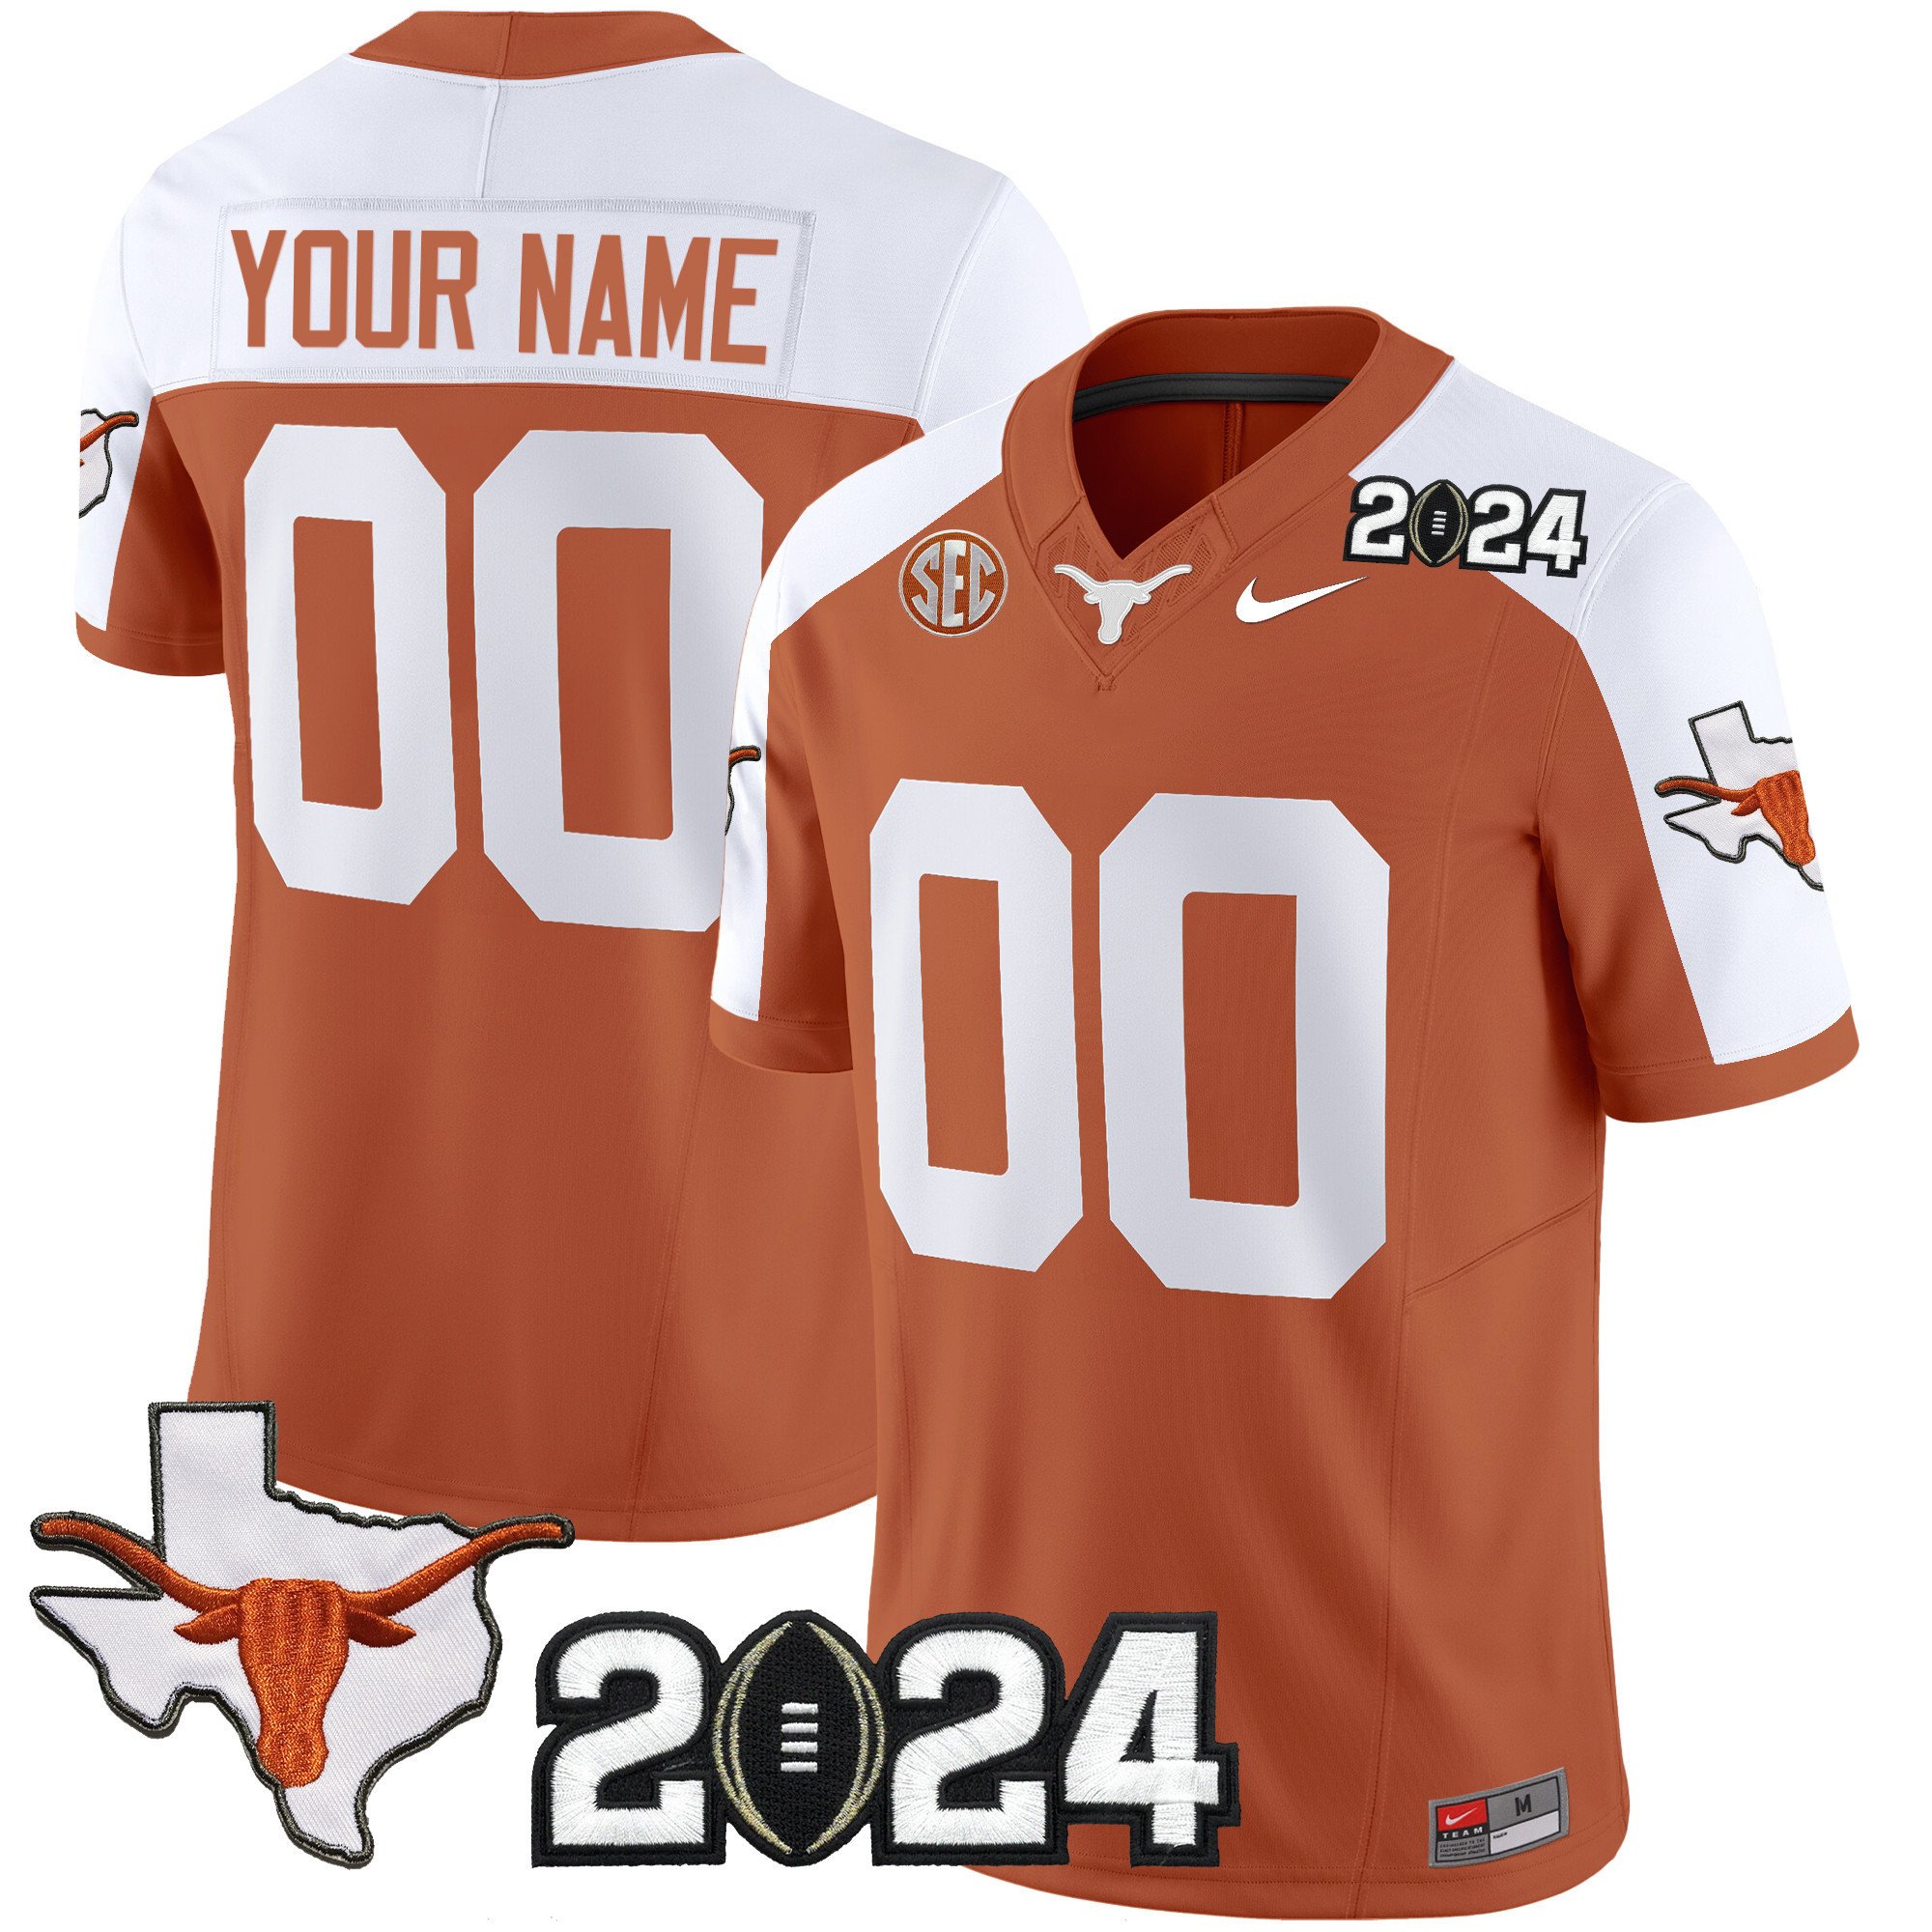 Texas Longhorns 2024 Vapor Limited Custom Jersey  All Stitched Pjc4r 